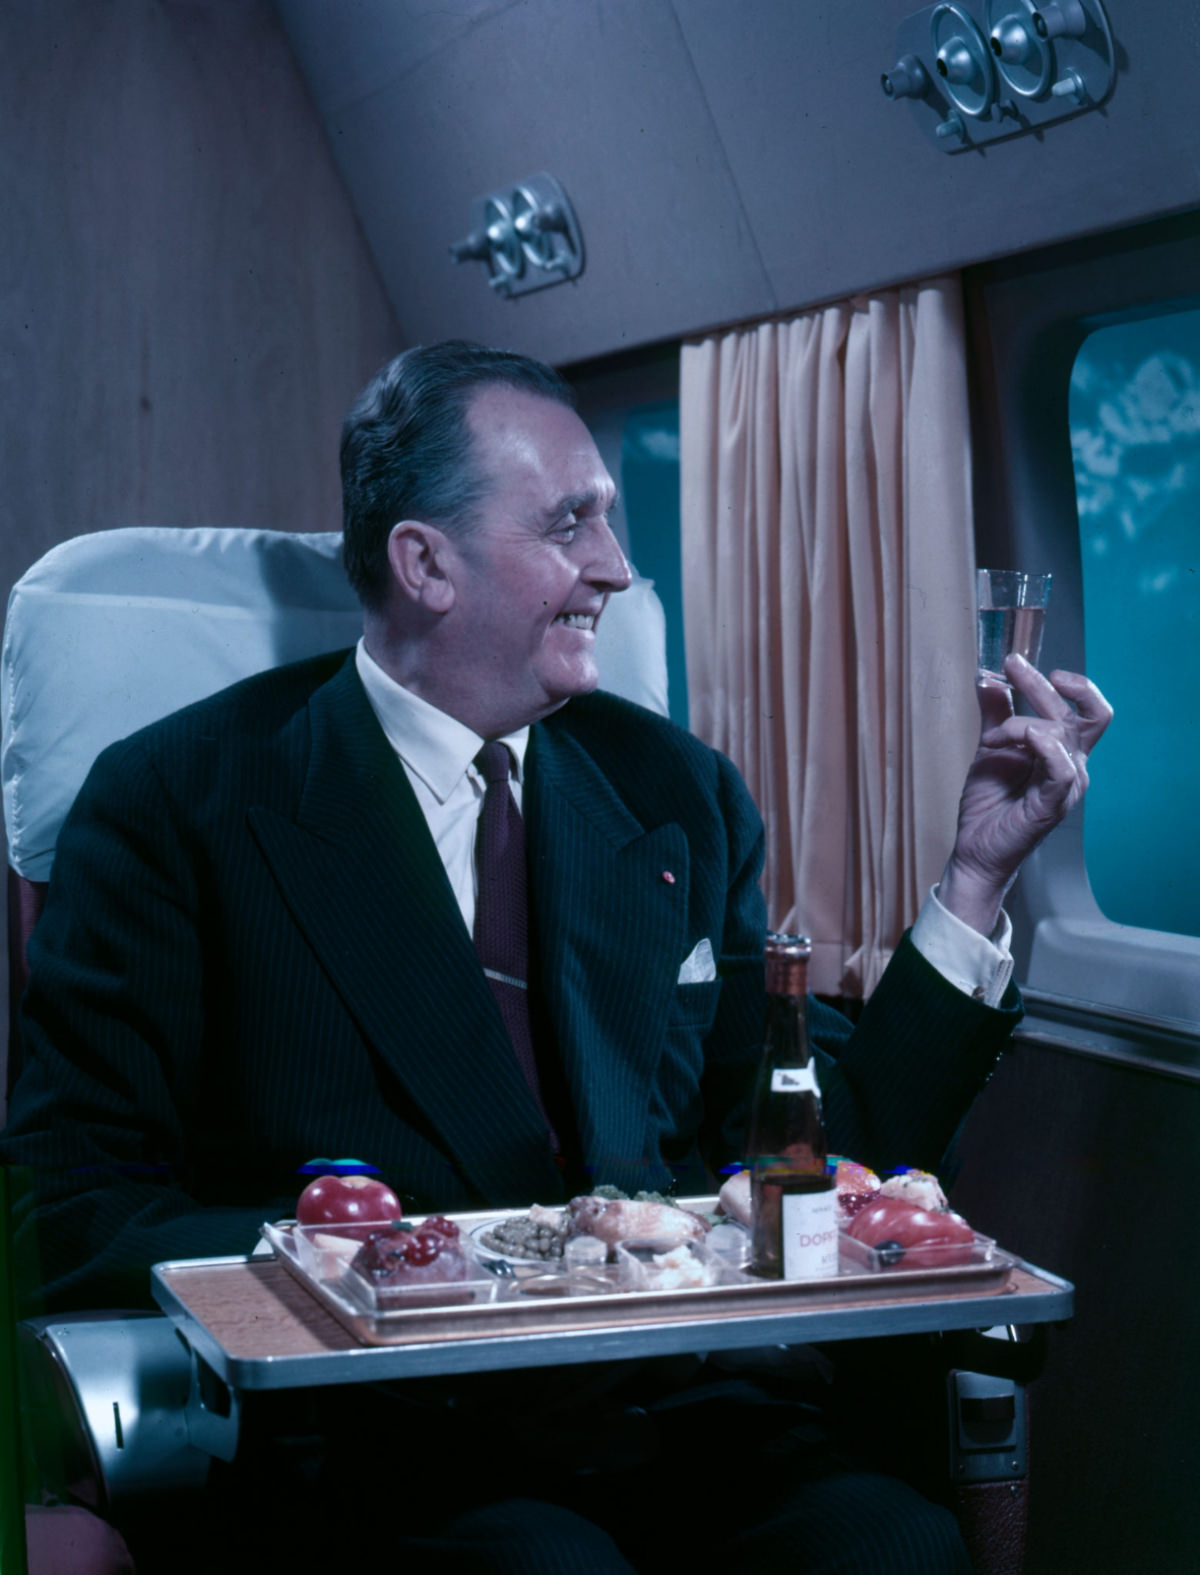 Breakfast in Bed: Vintage Photos of the First Class of Air France in the 1950s